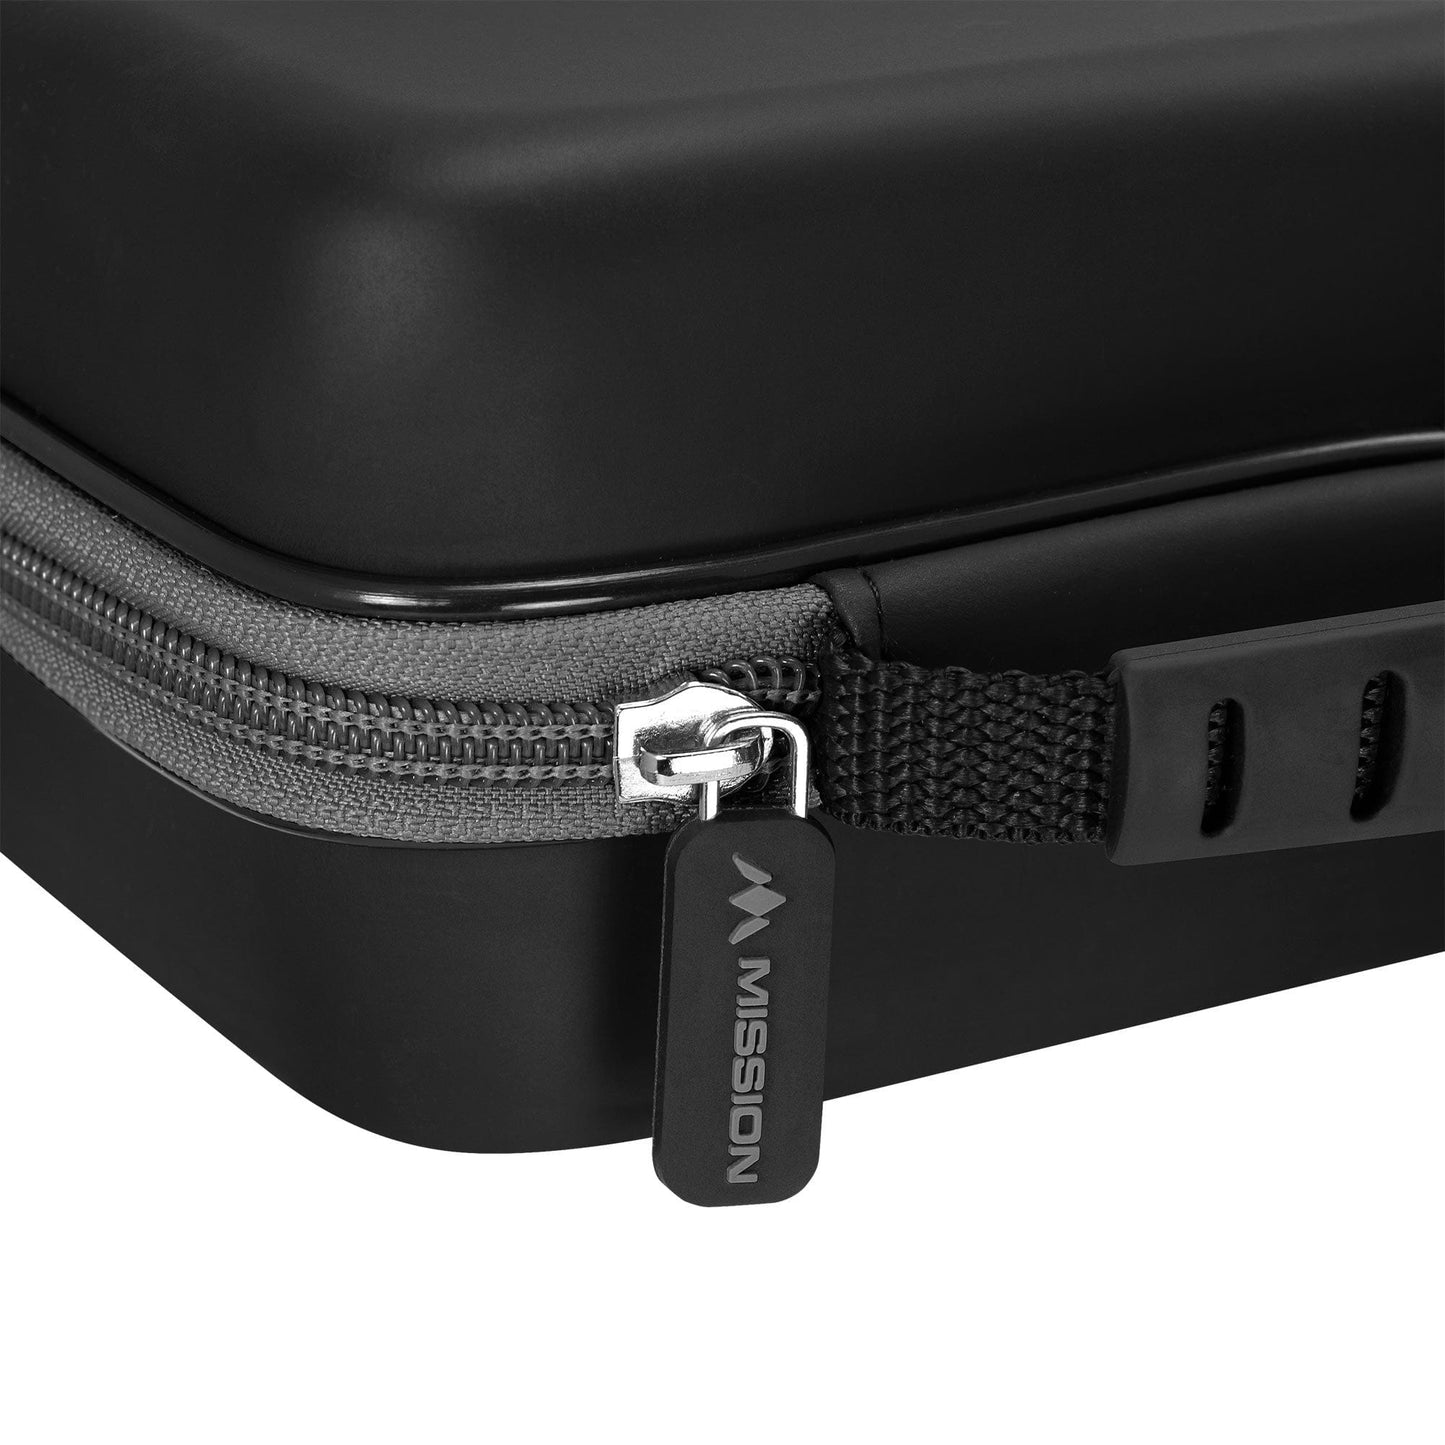 Mission Freedom Luxor Darts Case - Strong Protection